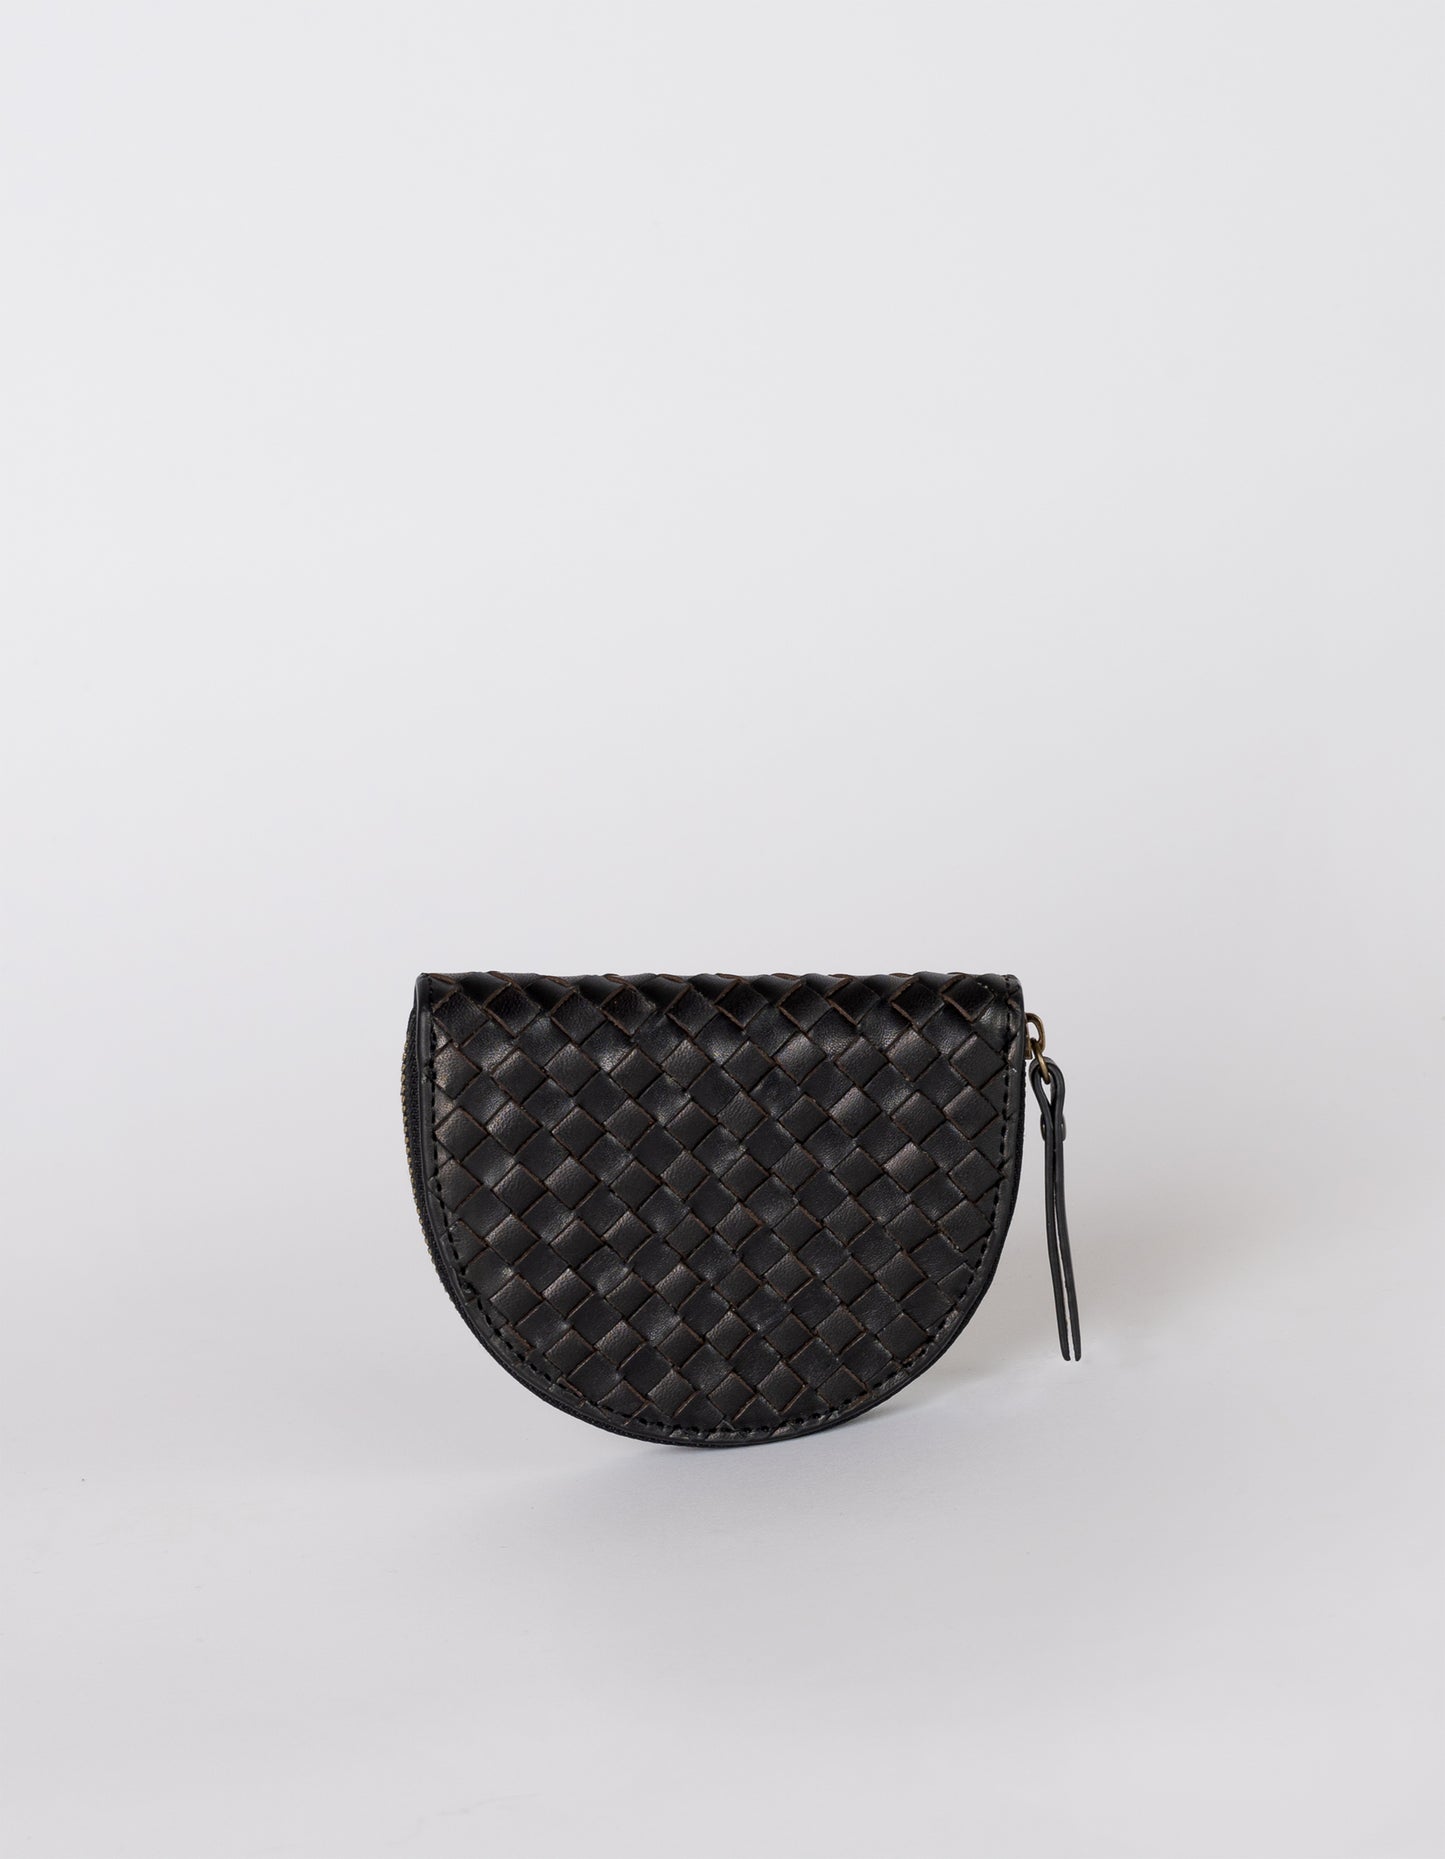 O MY BAG - Laura Coin Purse Black Woven Classic Leather